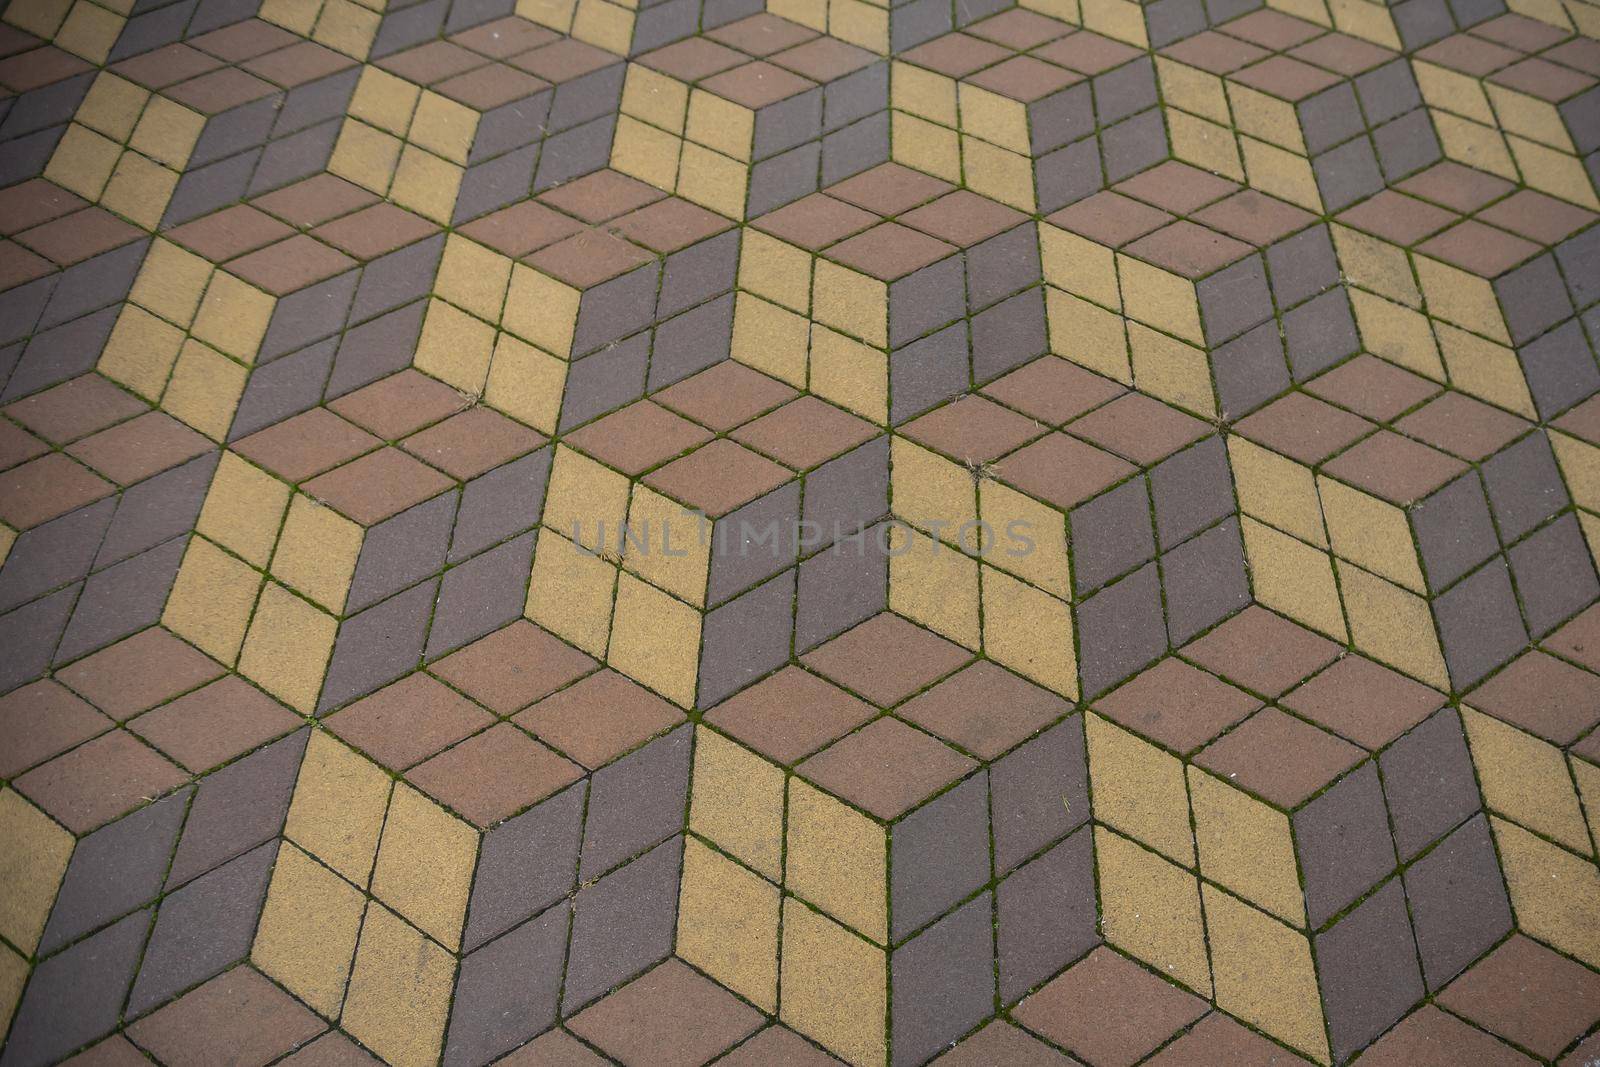 Mosaic Tile in Cube Pattern by Andelov13